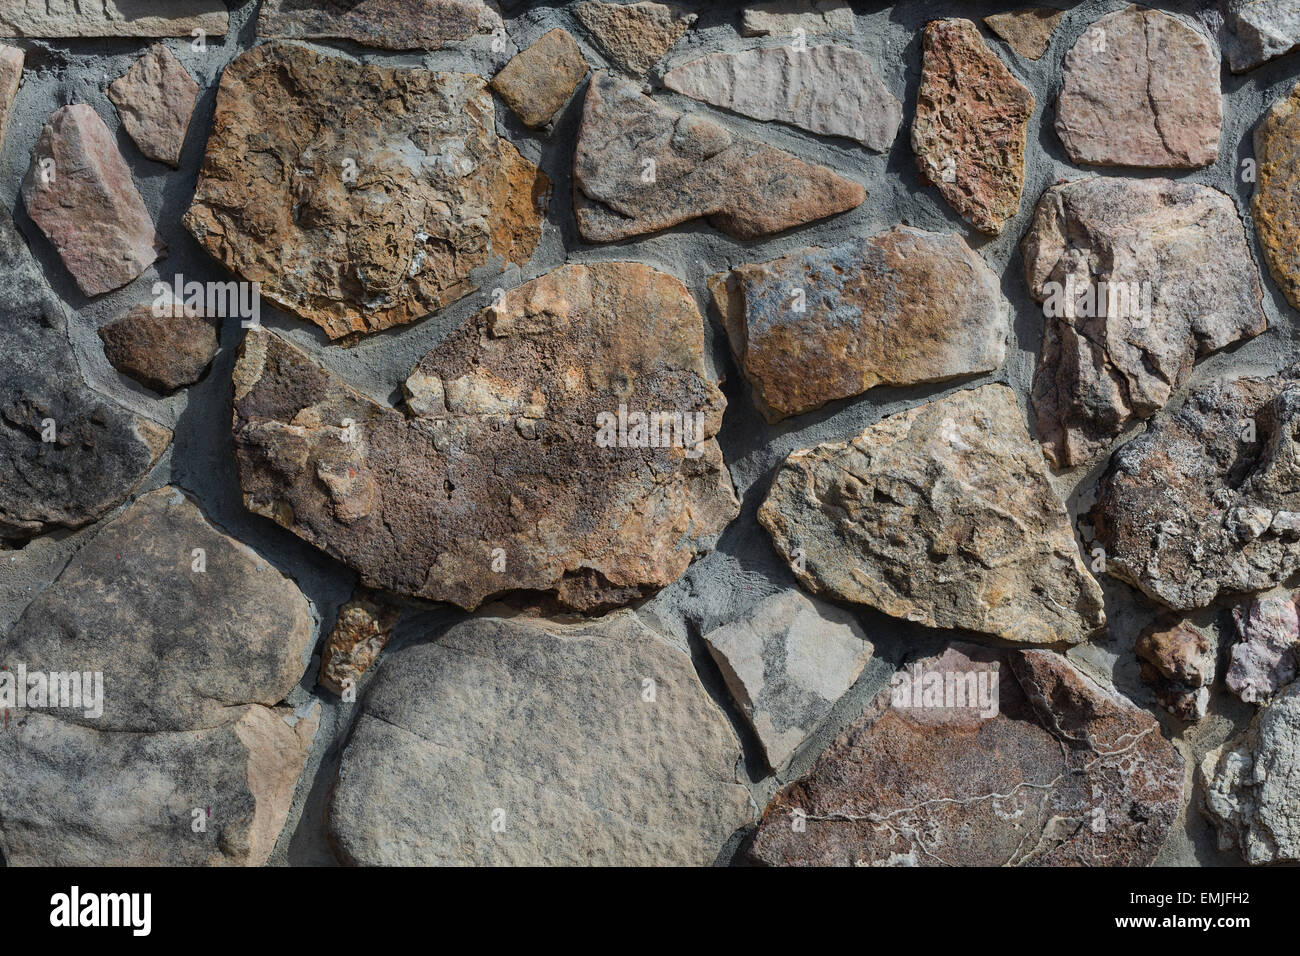 Dark rock background texture image abstract river stones Stock Photo